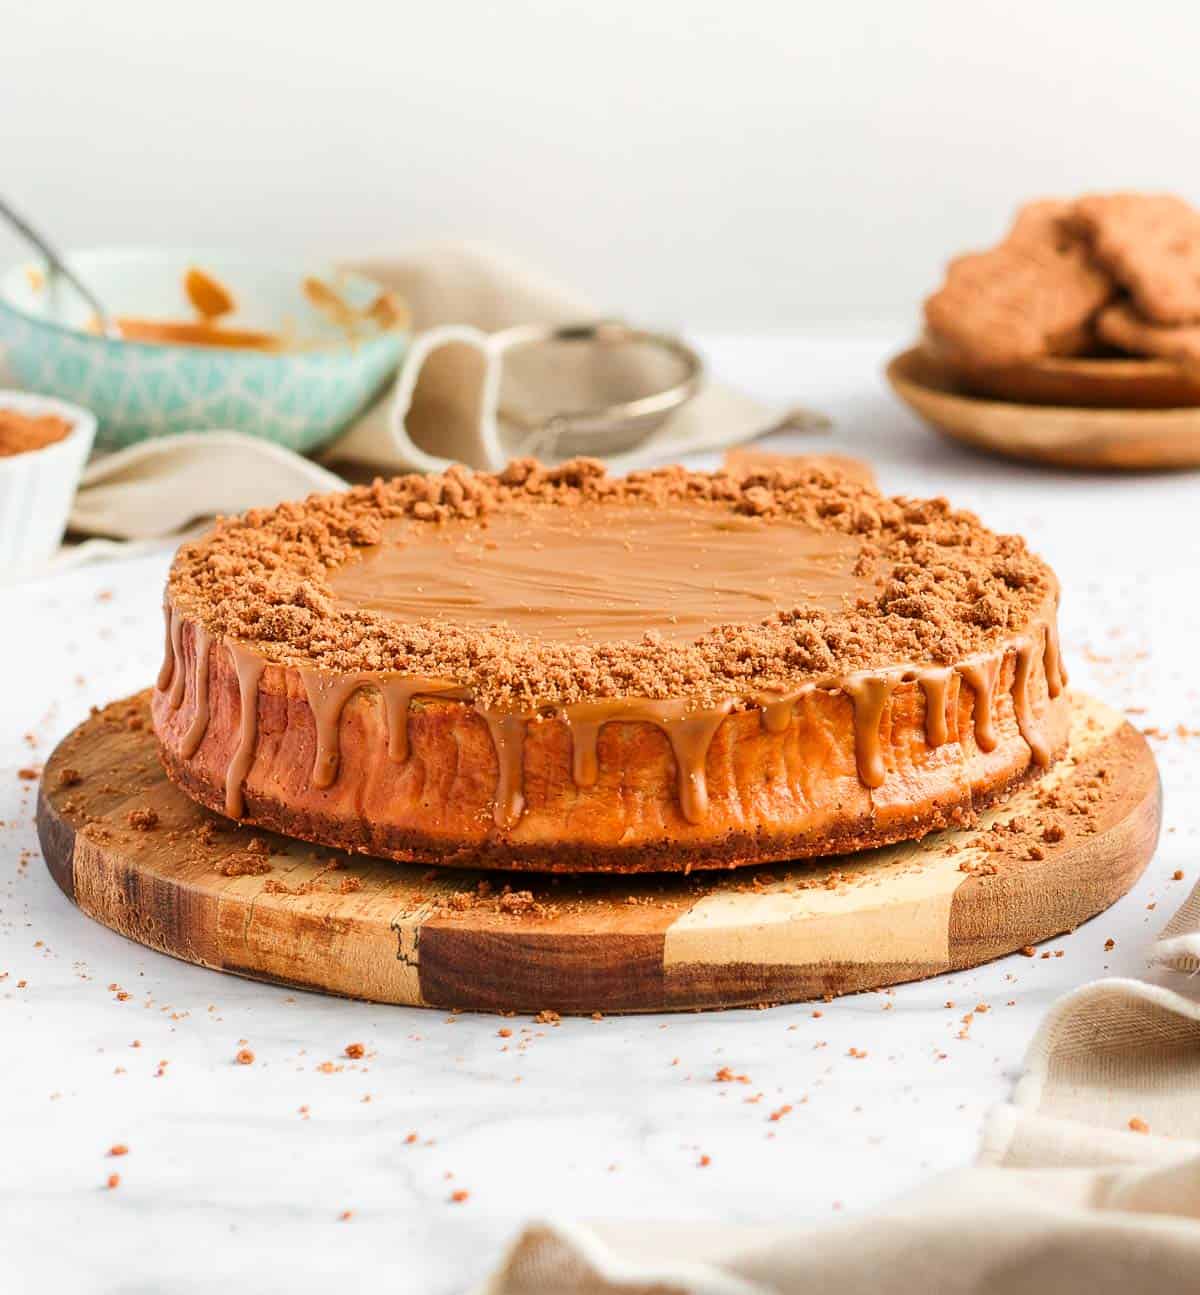 Biscoff Cheesecake on a round wooden board surrounded by speculoos cookies and a bowl with biscoff spread.